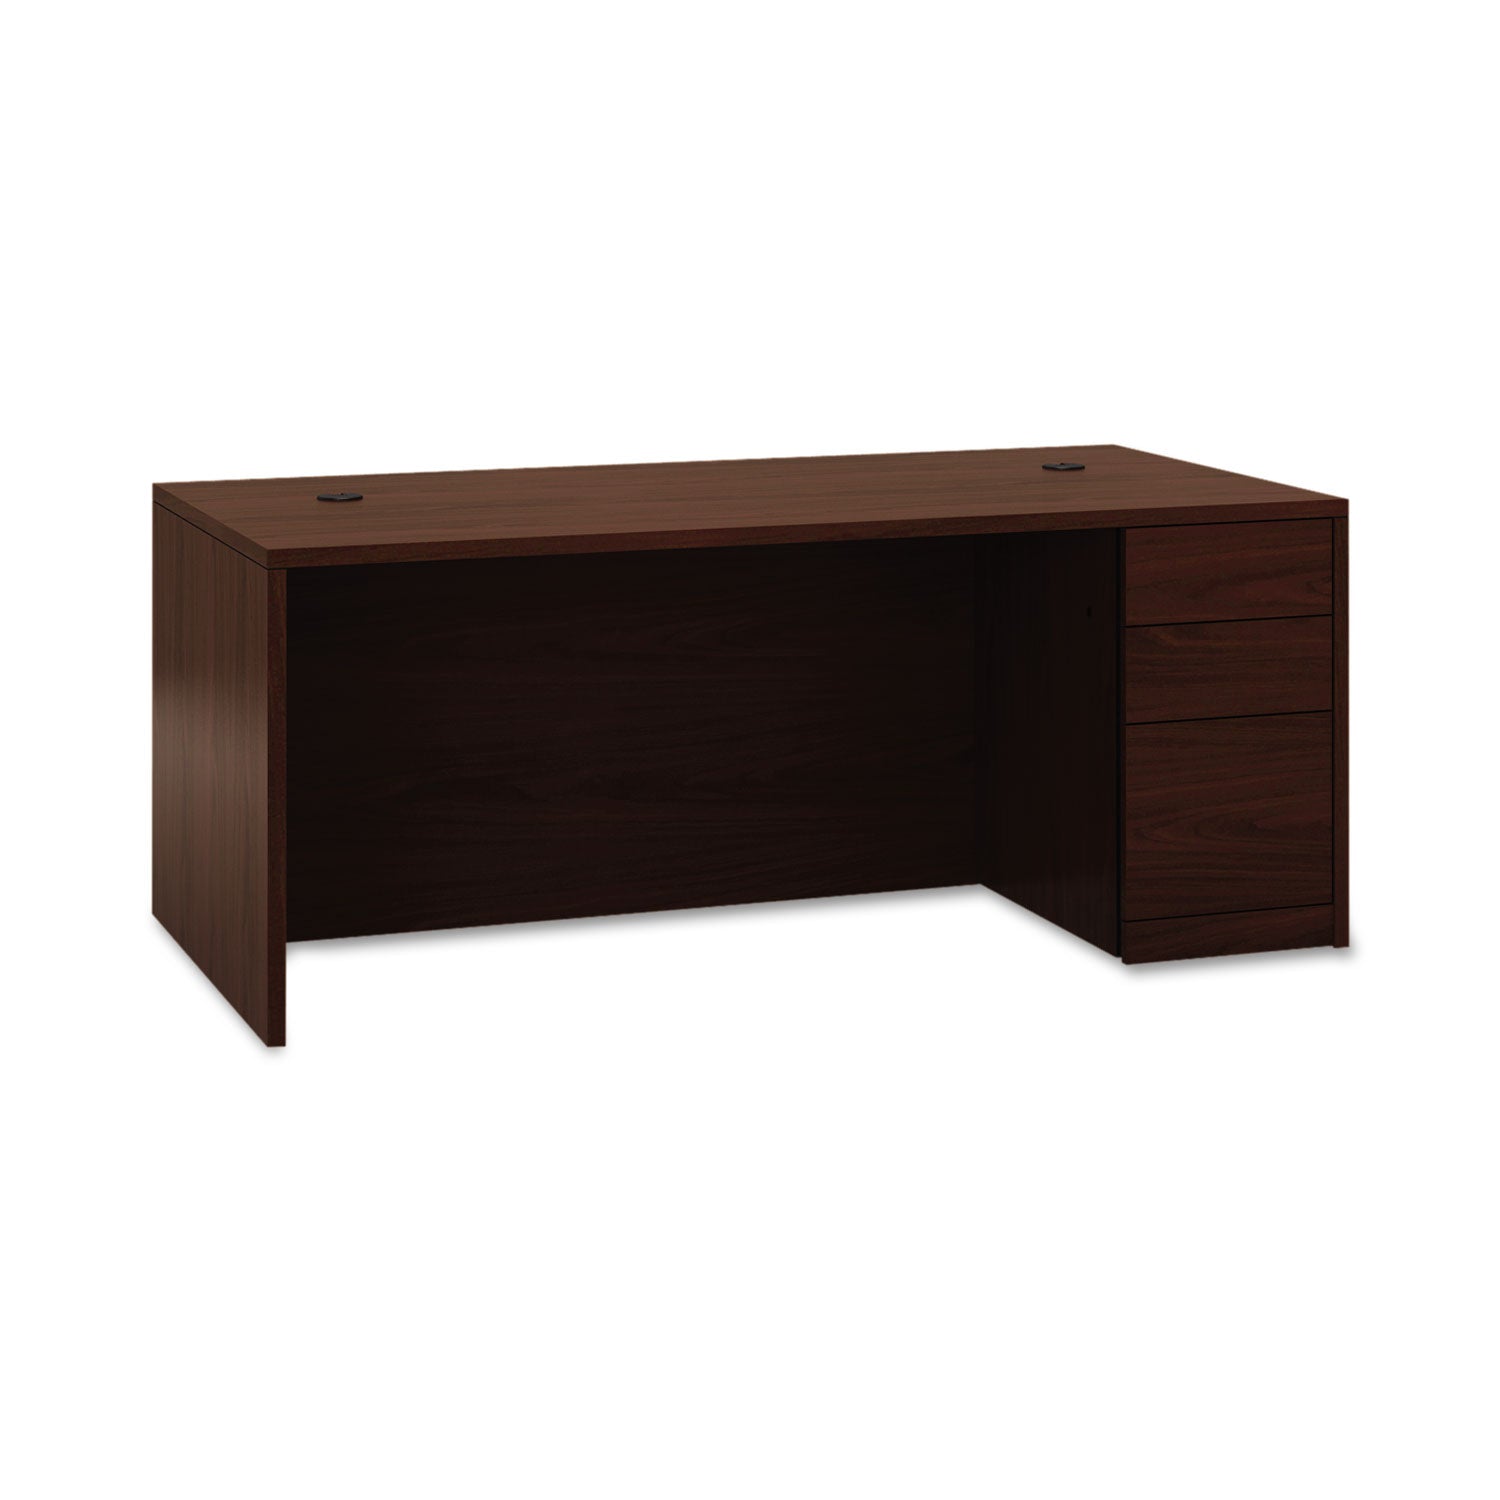 10500 Series "L" Workstation Right Pedestal Desk with Full-Height Pedestal, 72" x 36" x 29.5", Mahogany - 